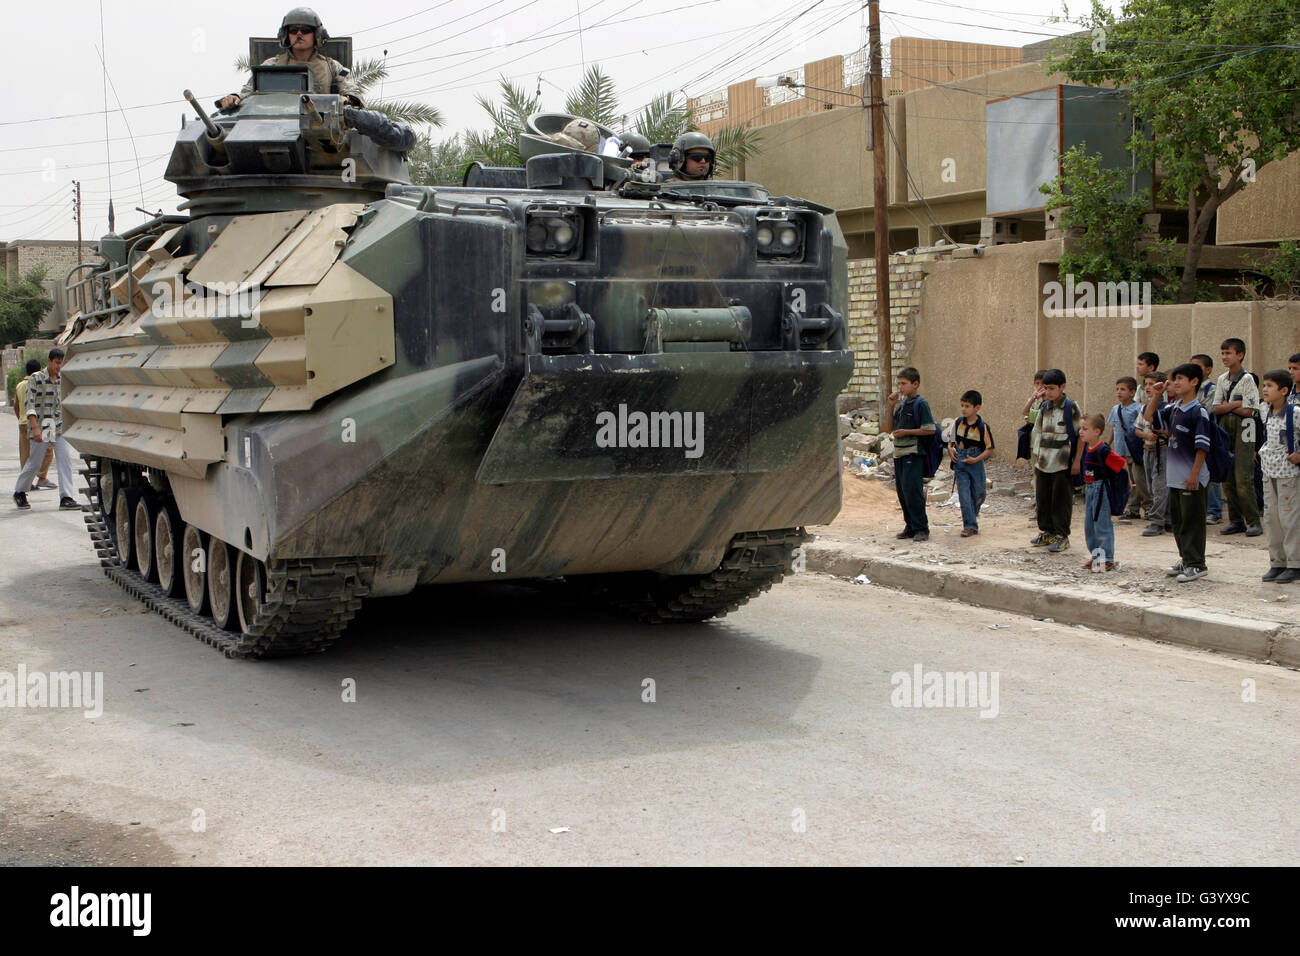 An Amphibious Assault Vehicle rolls down the city streets while patrolling. Stock Photo